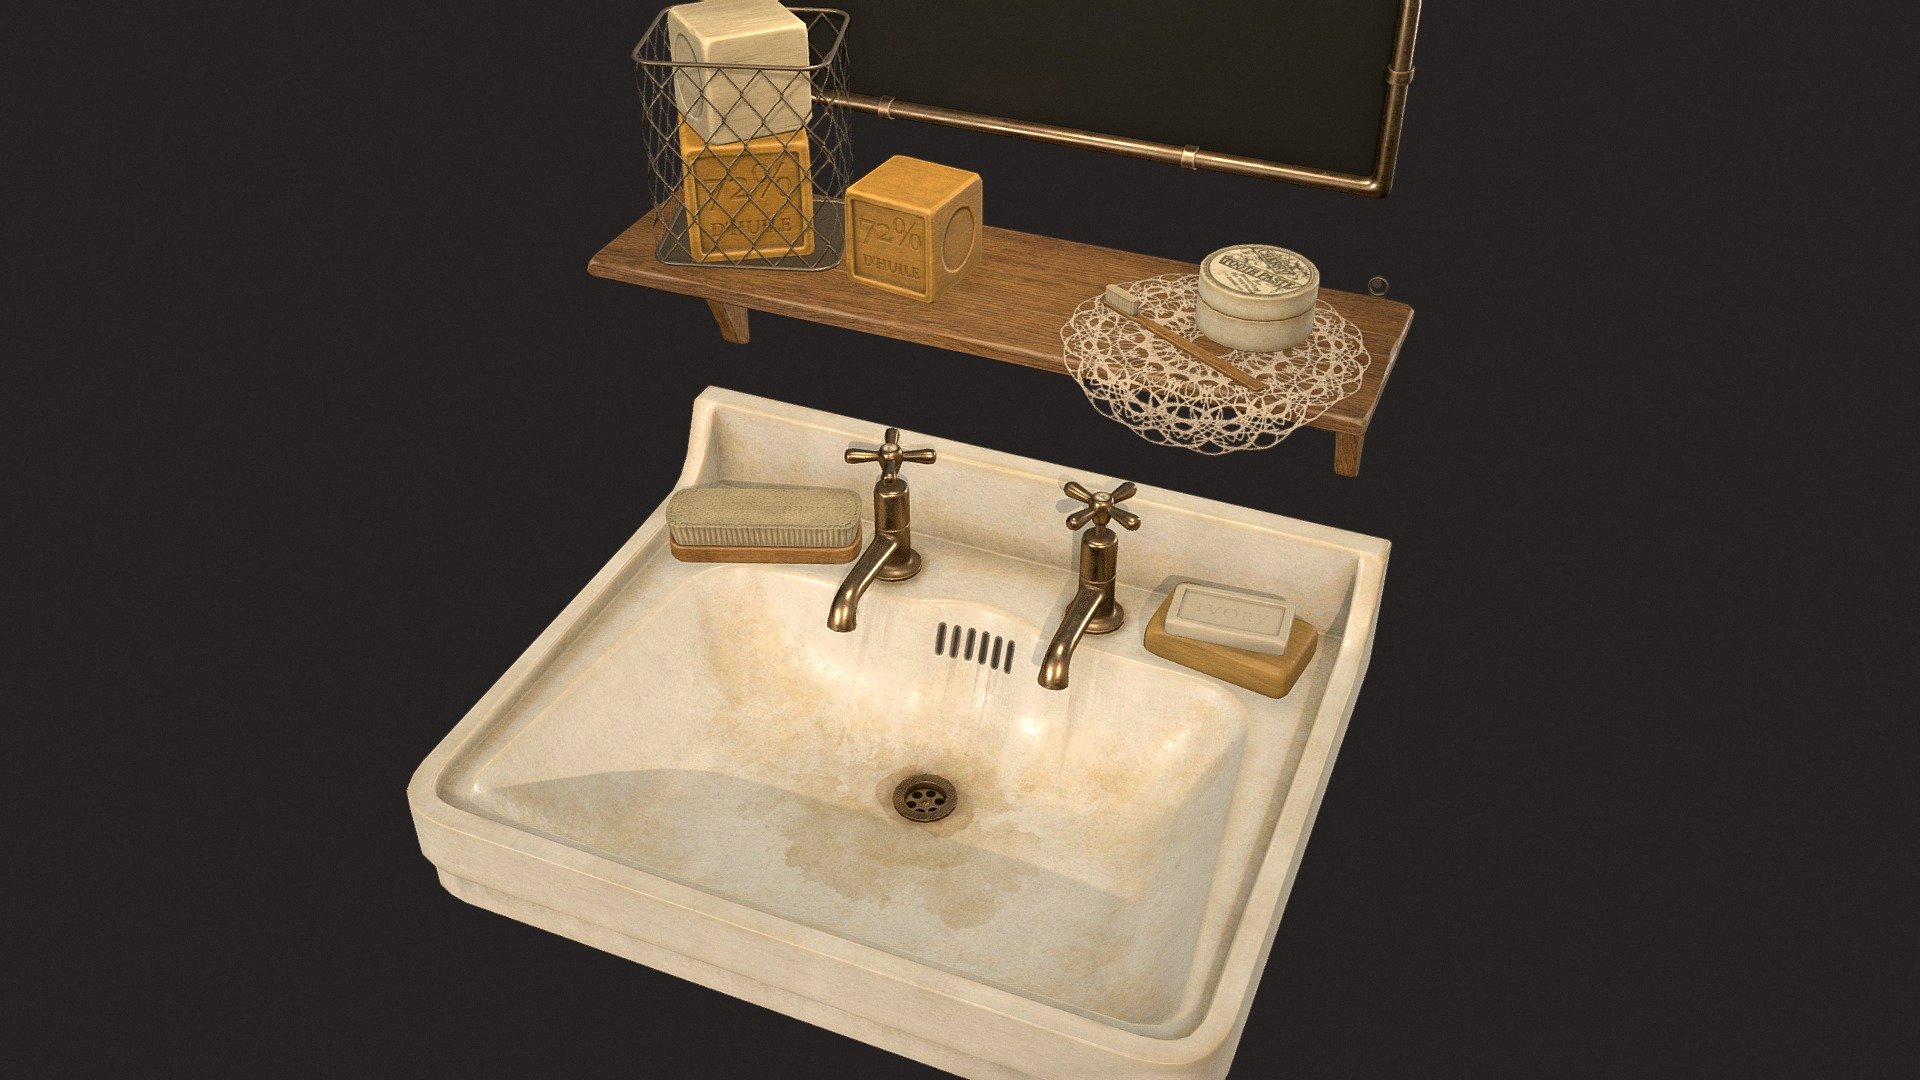 Victorian Sink and Bath Props set it's a lowpoly game ready set of models with unwrapped UVs and PBR textures.

This set includes 13 different models (sink, mirror, lamp, shelf, 4 soap models, soap stand, toothpaste, toothbrush, clothing brush and doily). 

UVs: channel 1: overlapping; channel 2: non-overlapping (for baking lightmaps).

Formats: FBX, Obj. Marmoset Toolbag scene 3.08 (.tbscene) Textures format: TGA. Textures resolution: 2048x2048px.

Textures set includes: 




Metal_Roughness: BaseColor, Roughness, Metallic, Normal, Height, AO, Emissive. 

Unity 5 (Standart Metallic): AlbedoTransparency, AO, Normal, MetallicSmoothness, Emissive.

Unreal Engine 4: BaseColor, OcclusionRoughnessMetallic, Normal, Emissive.



Artstation: https://www.artstation.com/tatianagladkaya

Instagram: https://www.instagram.com/t.gladkaya_ - Victorian Sink and Bath Props - 3D model by Tatiana Gladkaya (@tatiana_gladkaya) 3d model